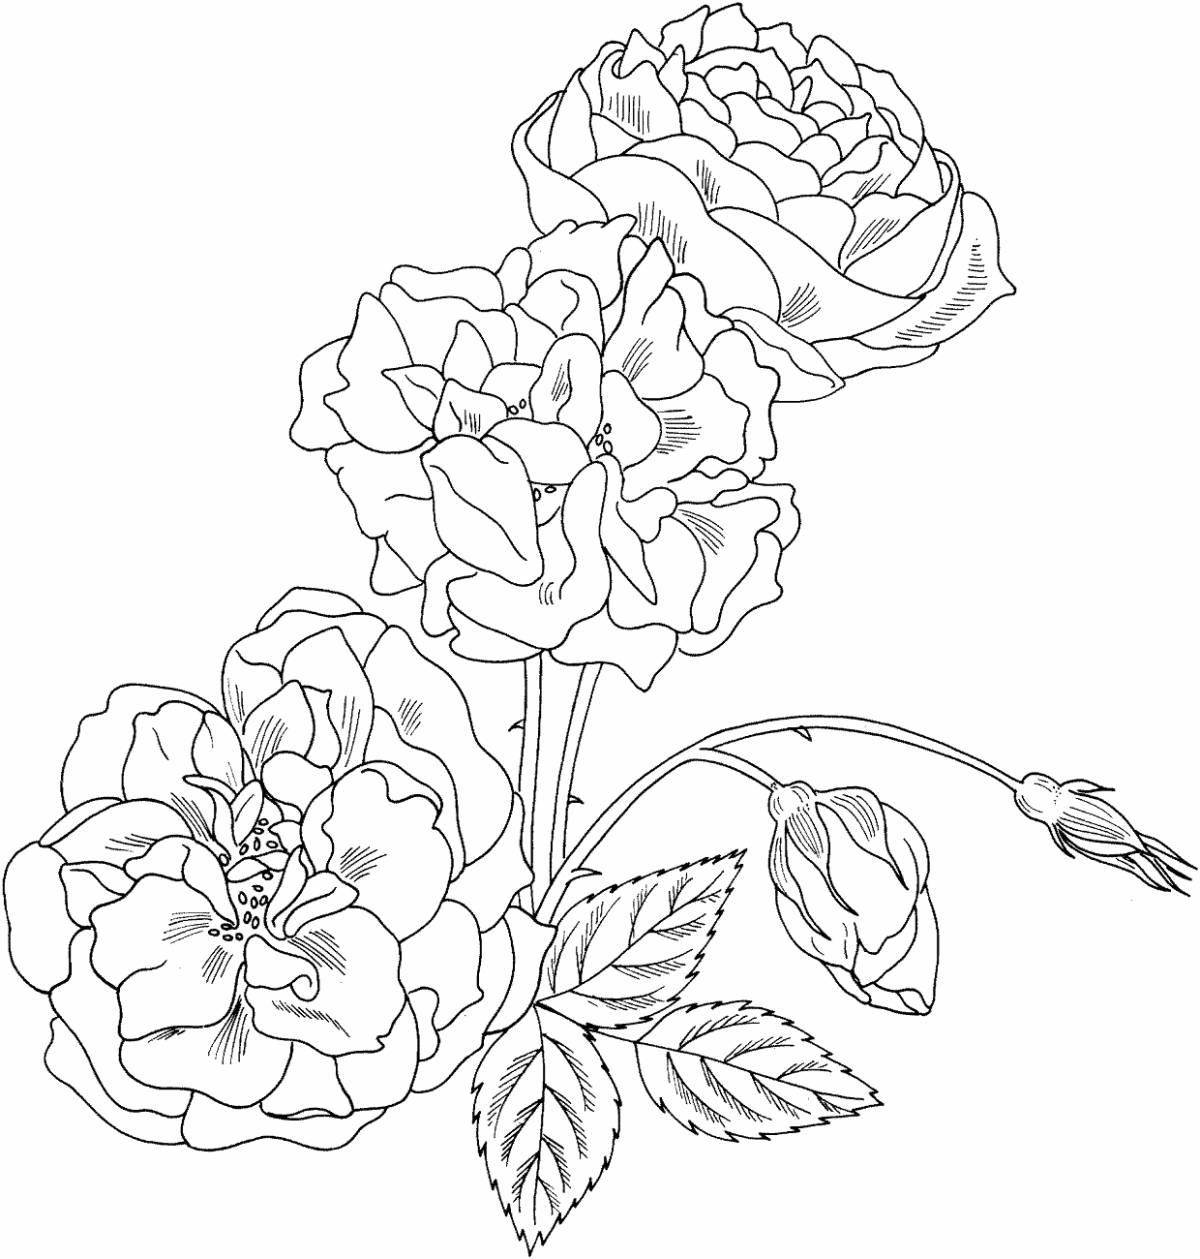 Coloring book shining bouquet of roses